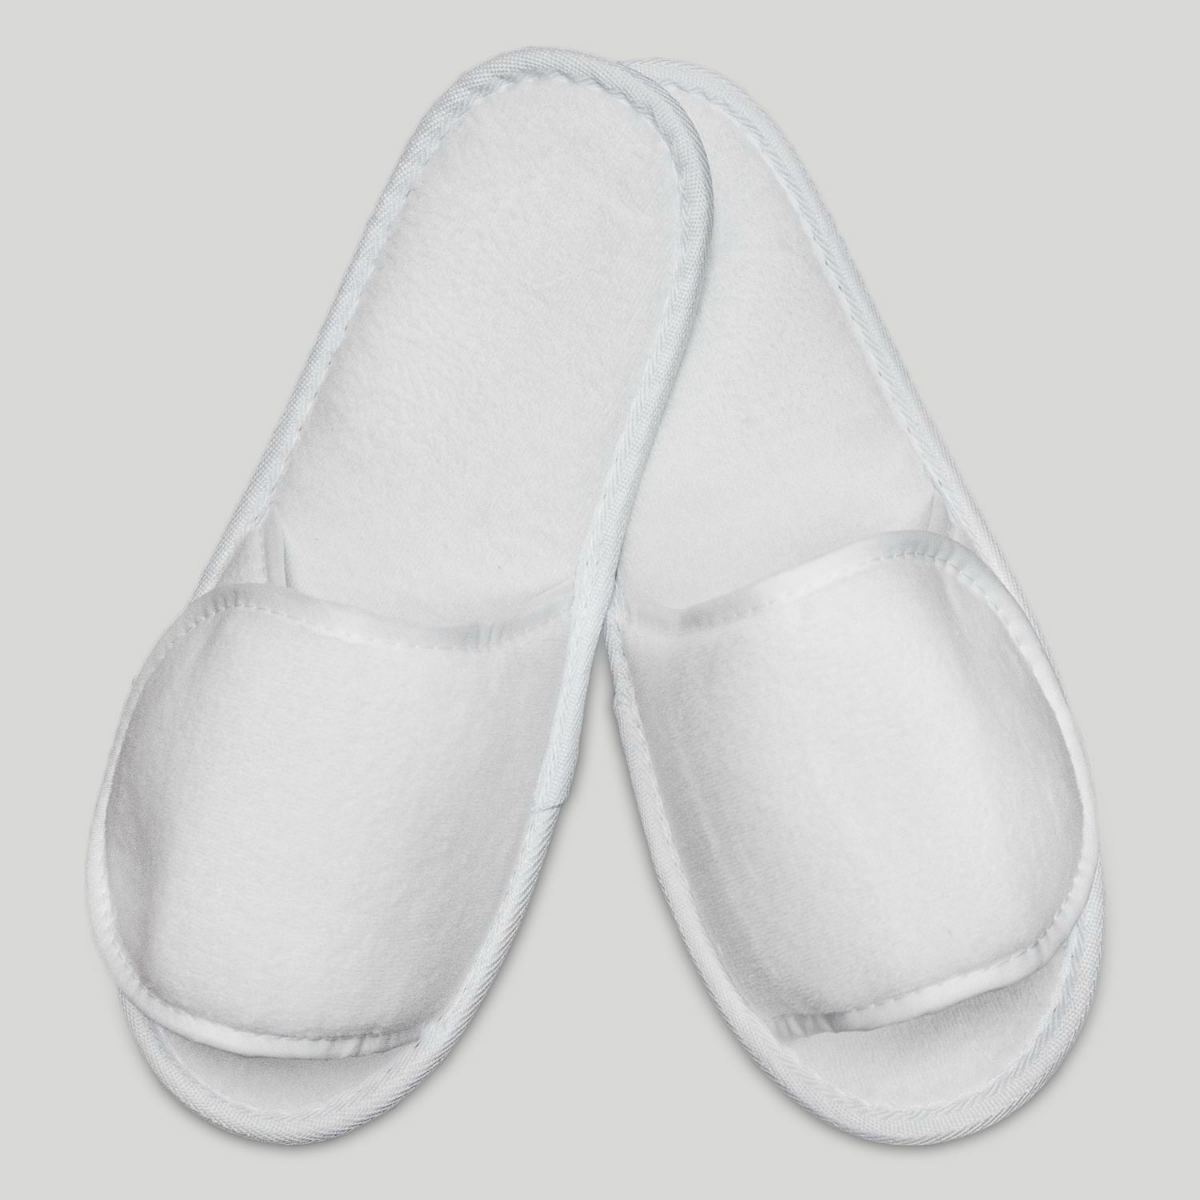 white velcro adjustable slippers | Top Things Every Motel Room Should Have | motel room | motel room items